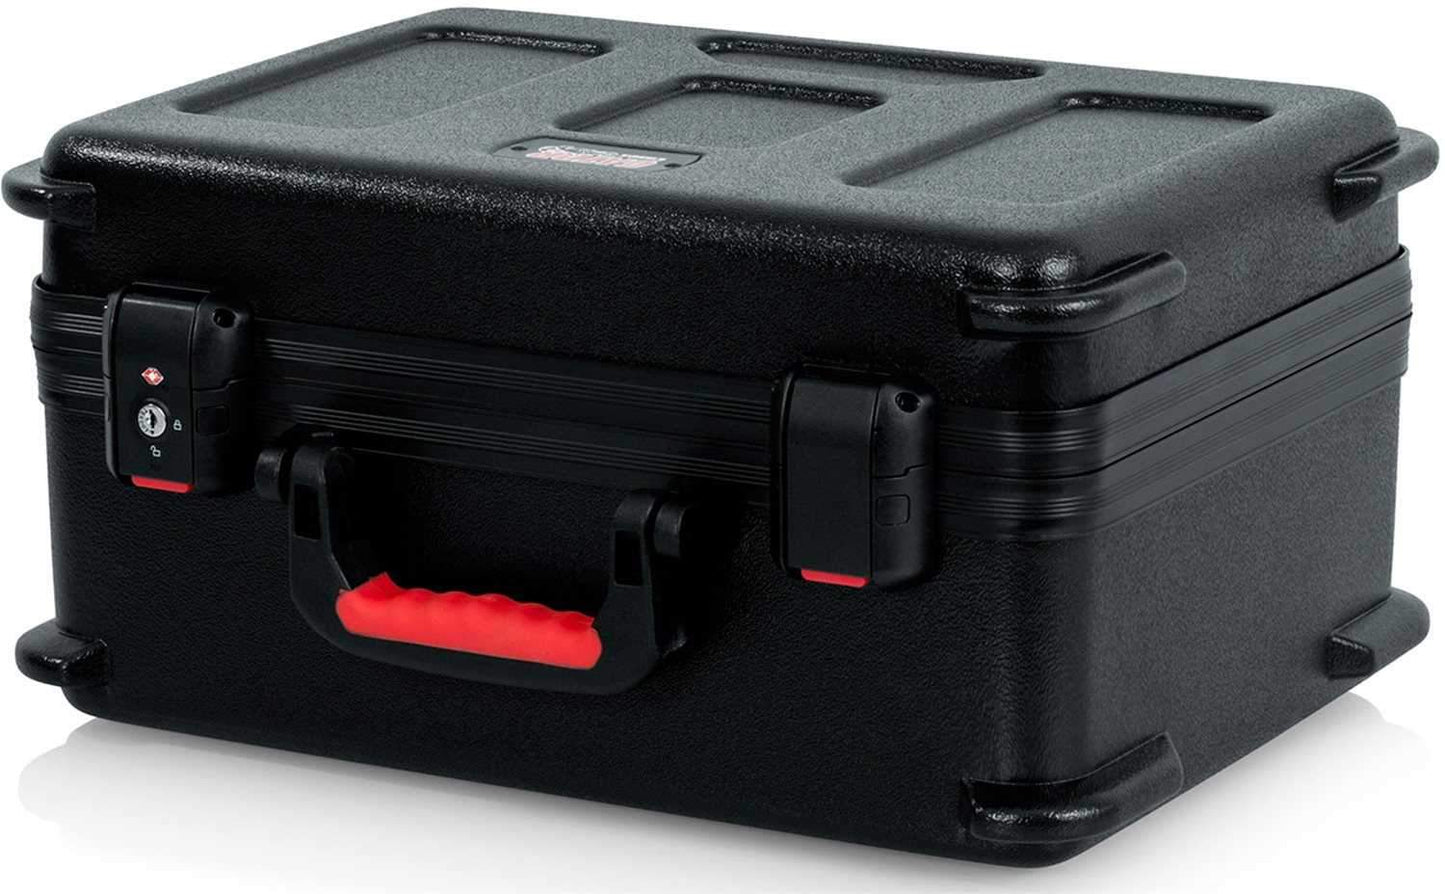 Gator GTSA-MIC15 Molded Case w Drops for 15 Mics - ProSound and Stage Lighting